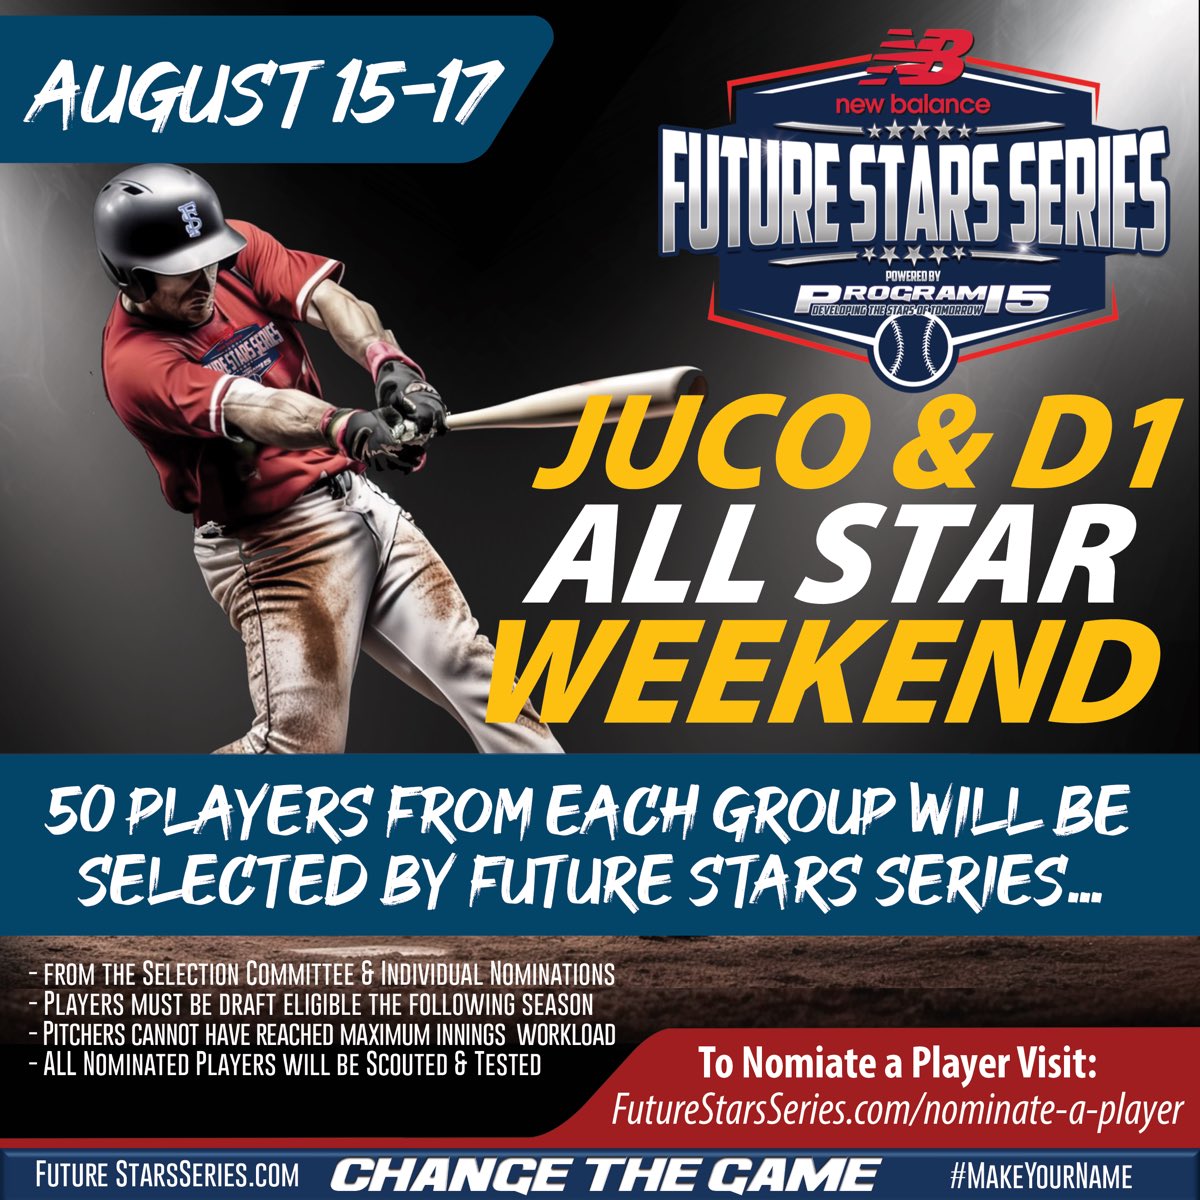 Today, we take another step forward. On the heels of the Main Event Showdown, the @NB_Baseball @ftrstarsseries brings you Juco and Division 1 Baseball All Star Weekend. Players are chosen from across the country, with college coaches from each level forming selection committees.